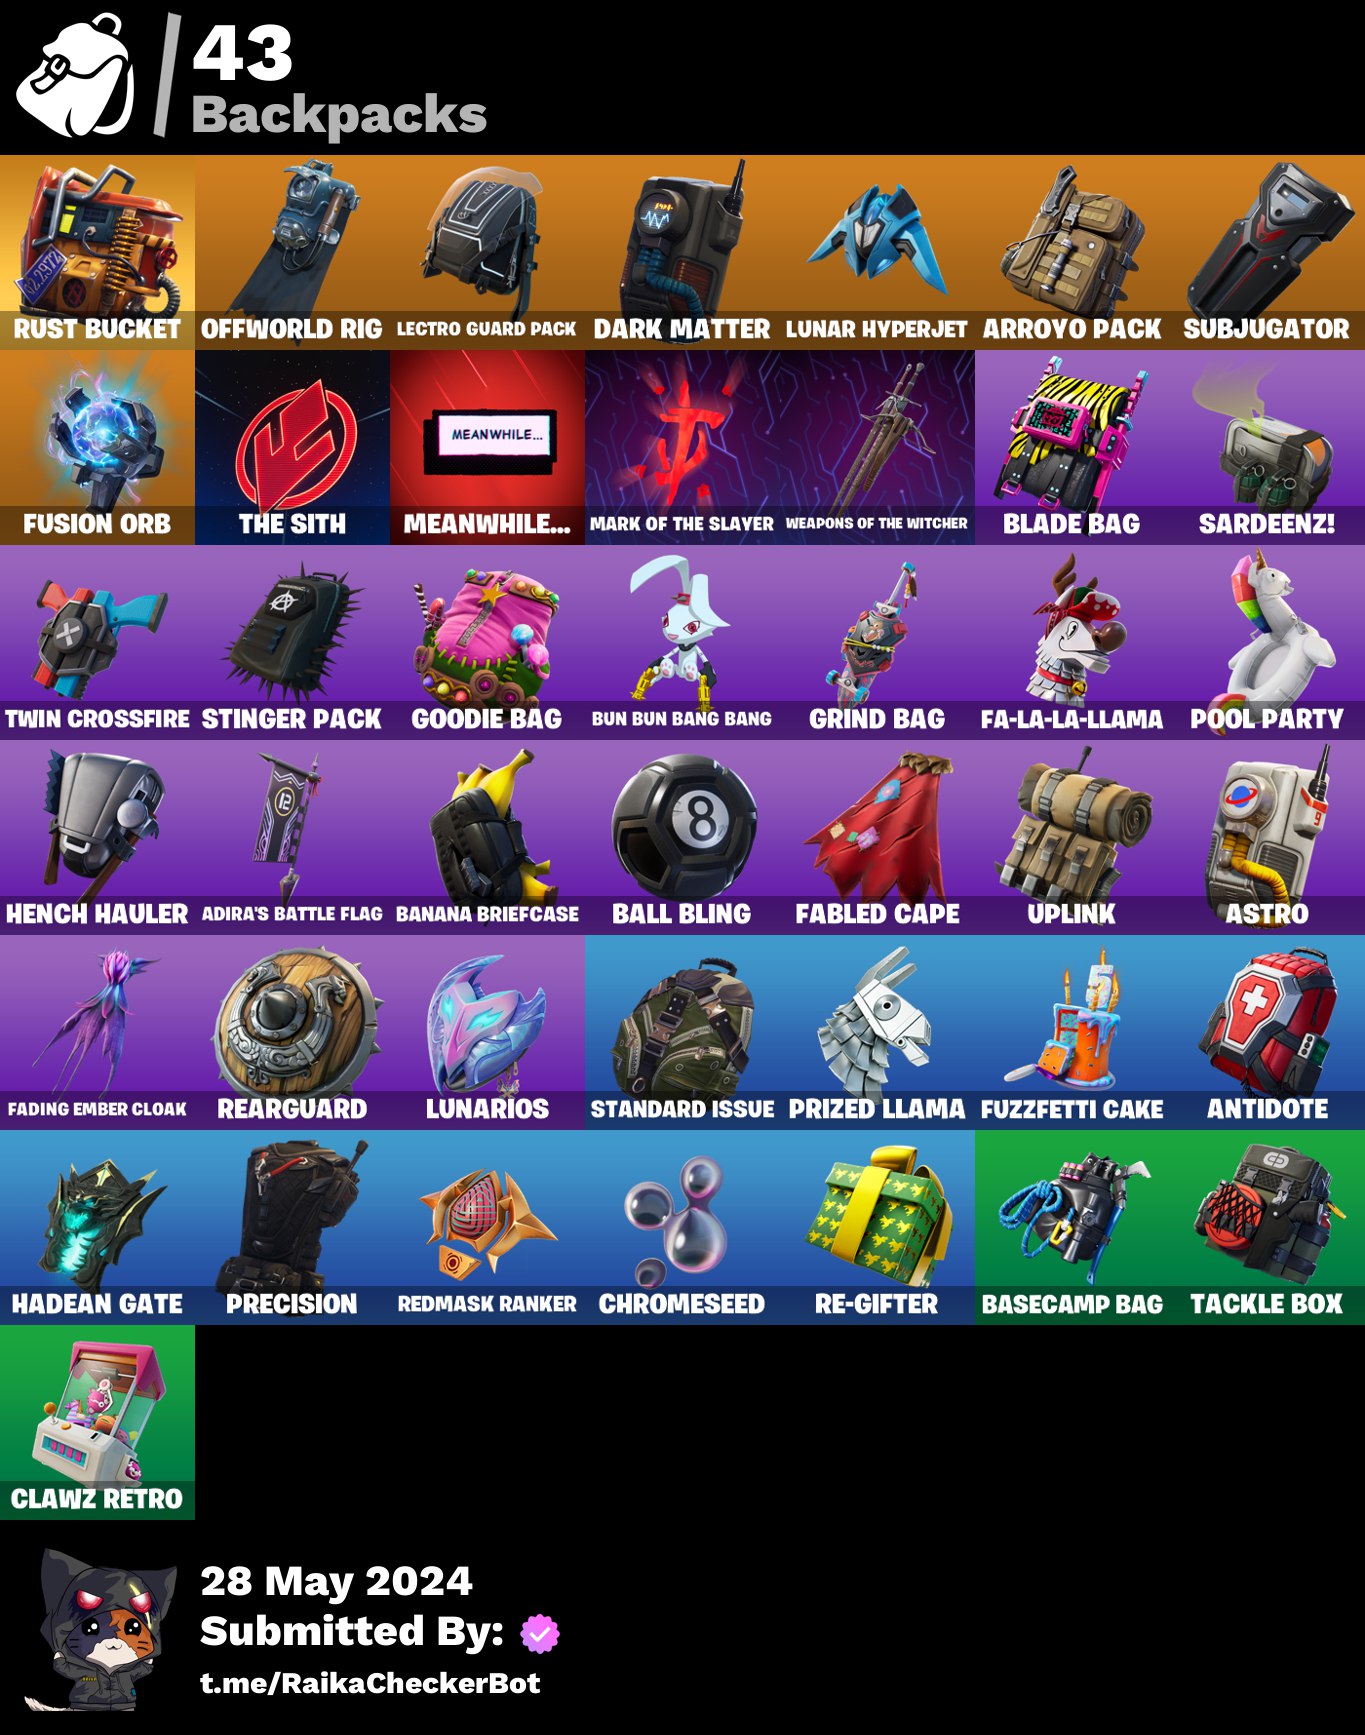 [PC/XBOX] 50 skins  /The Reaper / Elite Agent / Fusion / Calamity | Valor | Dark Voyager | The Visitor | Gear Specialist Maya | Omega | AX170